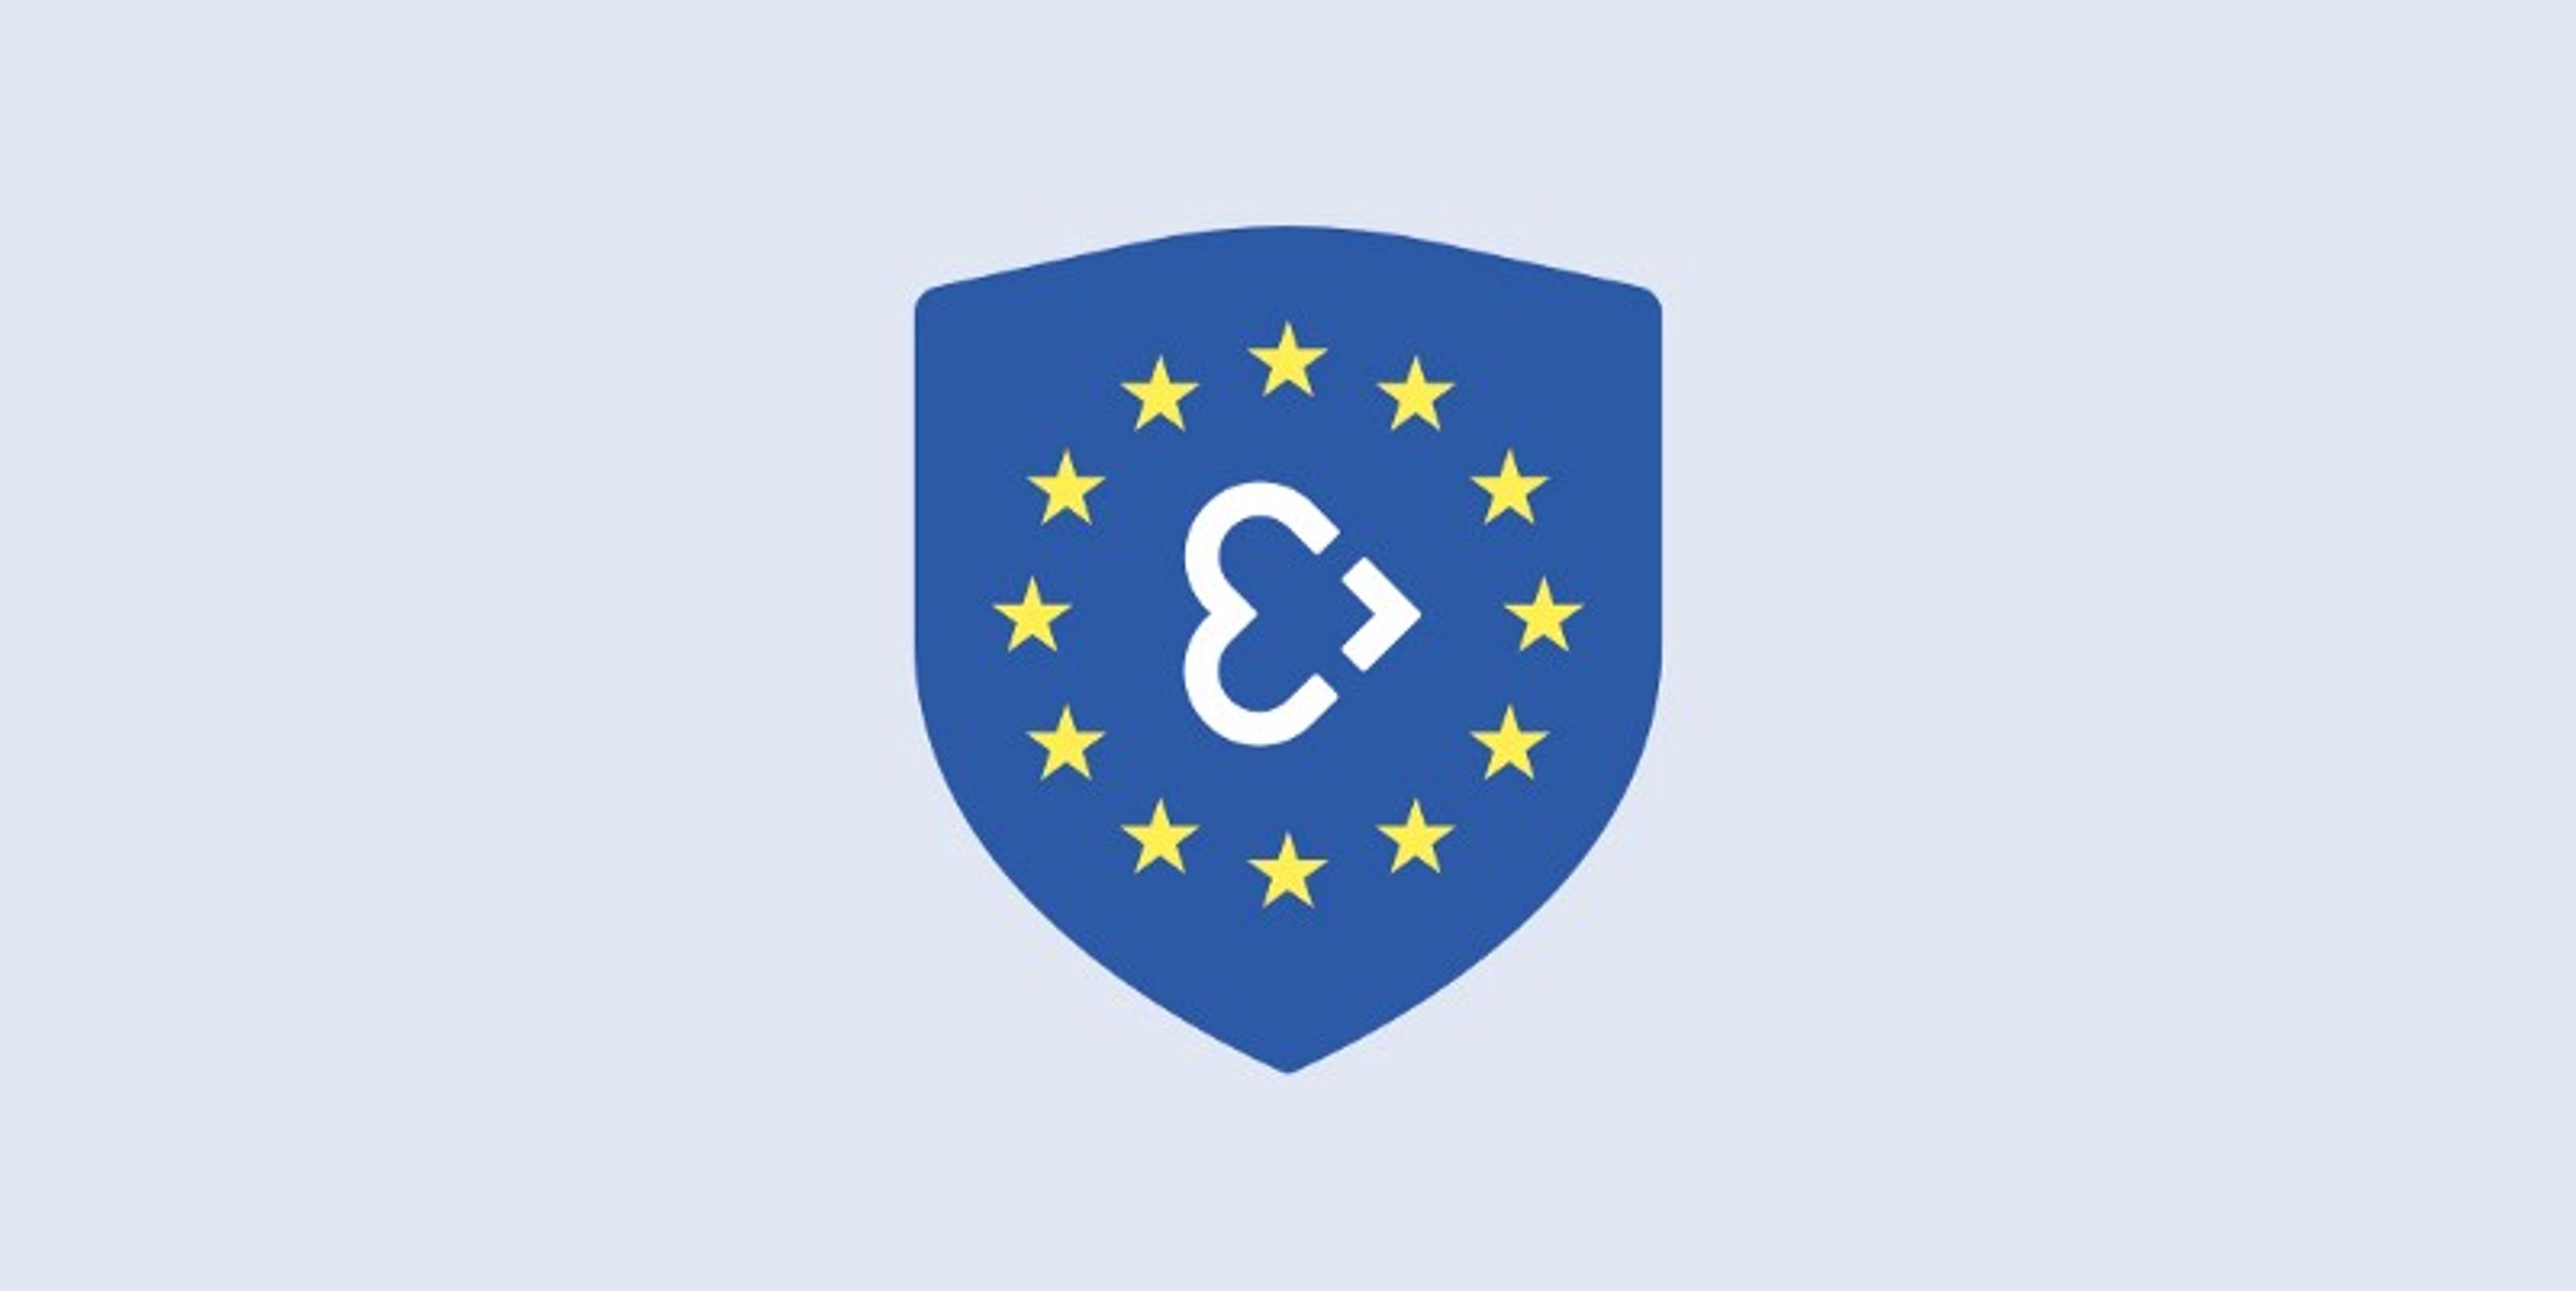 all-set-for-gdpr-a06947eaceb6-cover-image